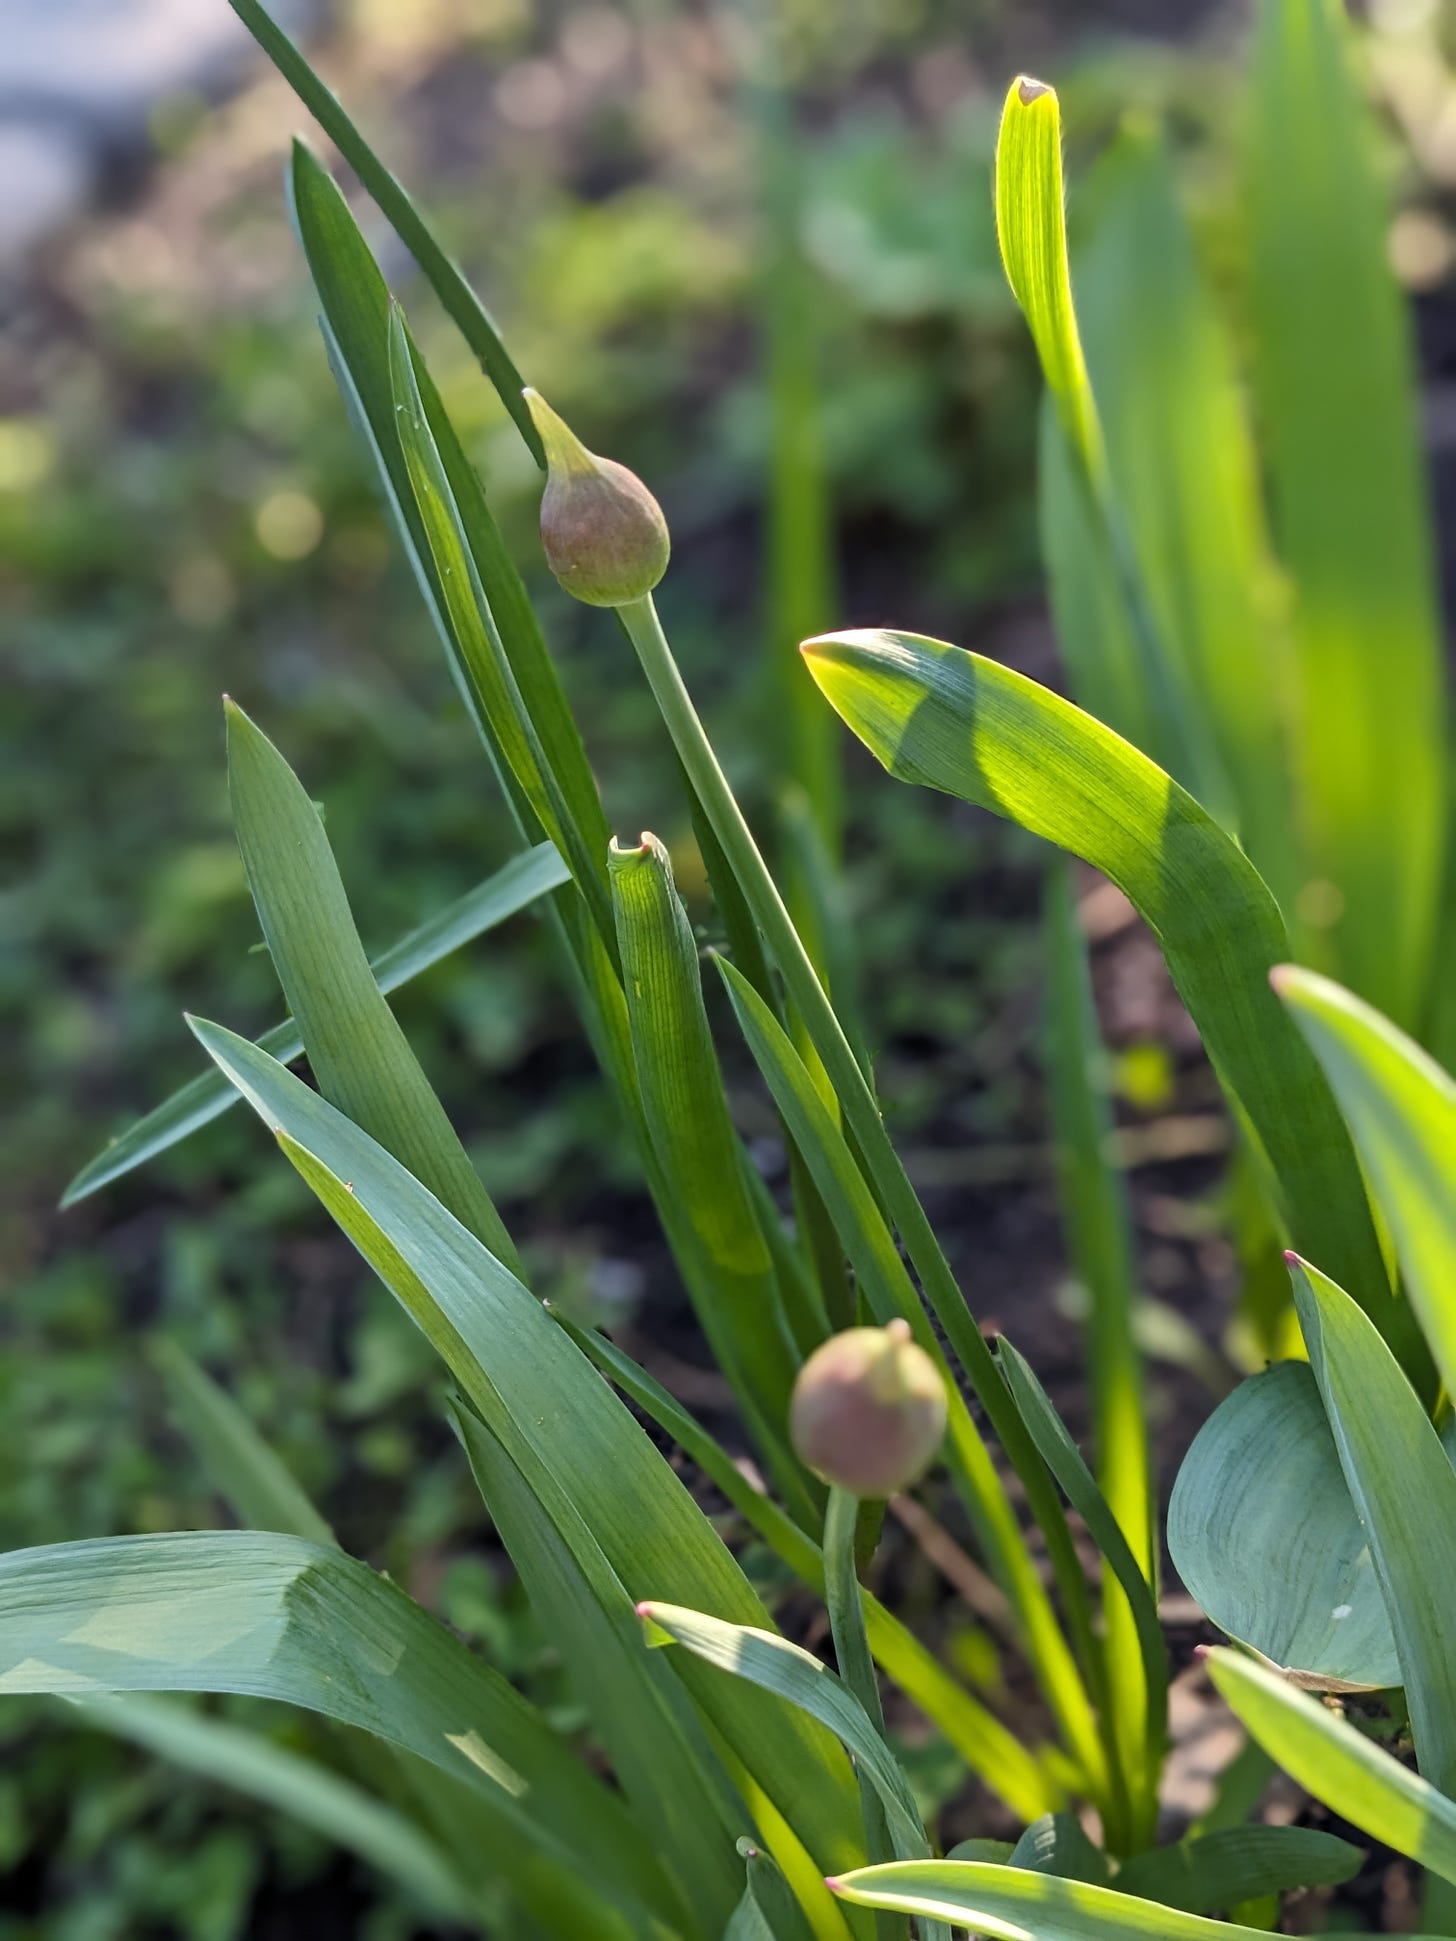 closeup on two pinkish-greenish bulbs growing at the top of two long green stems. some thick, flat leaves surround the stems growing up from the ground